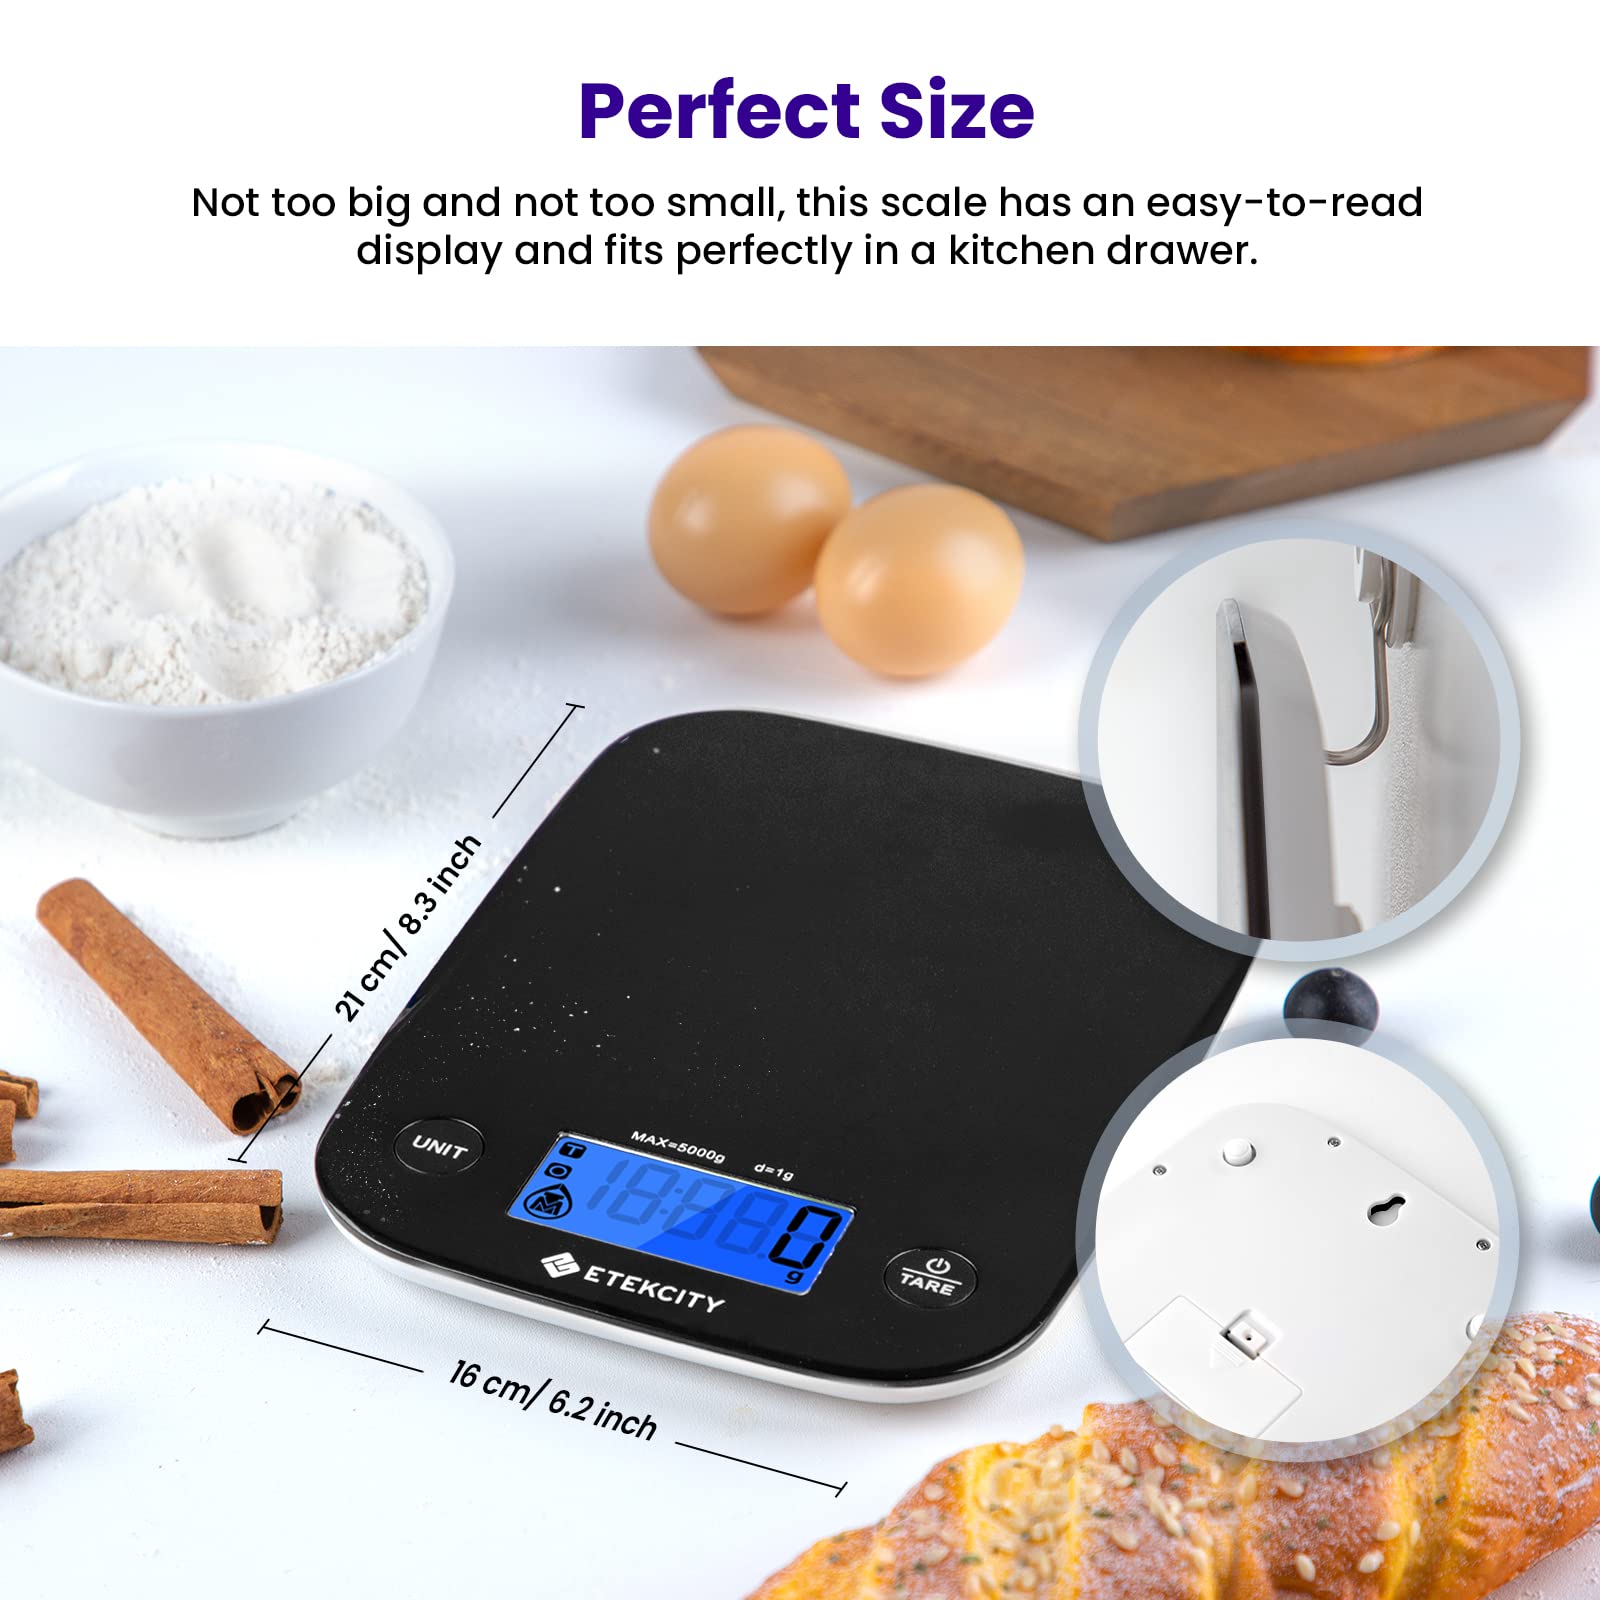 Etekcity Food Kitchen Scale, Digital Weight Grams and Oz for Cooking, Baking, Meal Prep, and Diet, Medium, Carbon Black